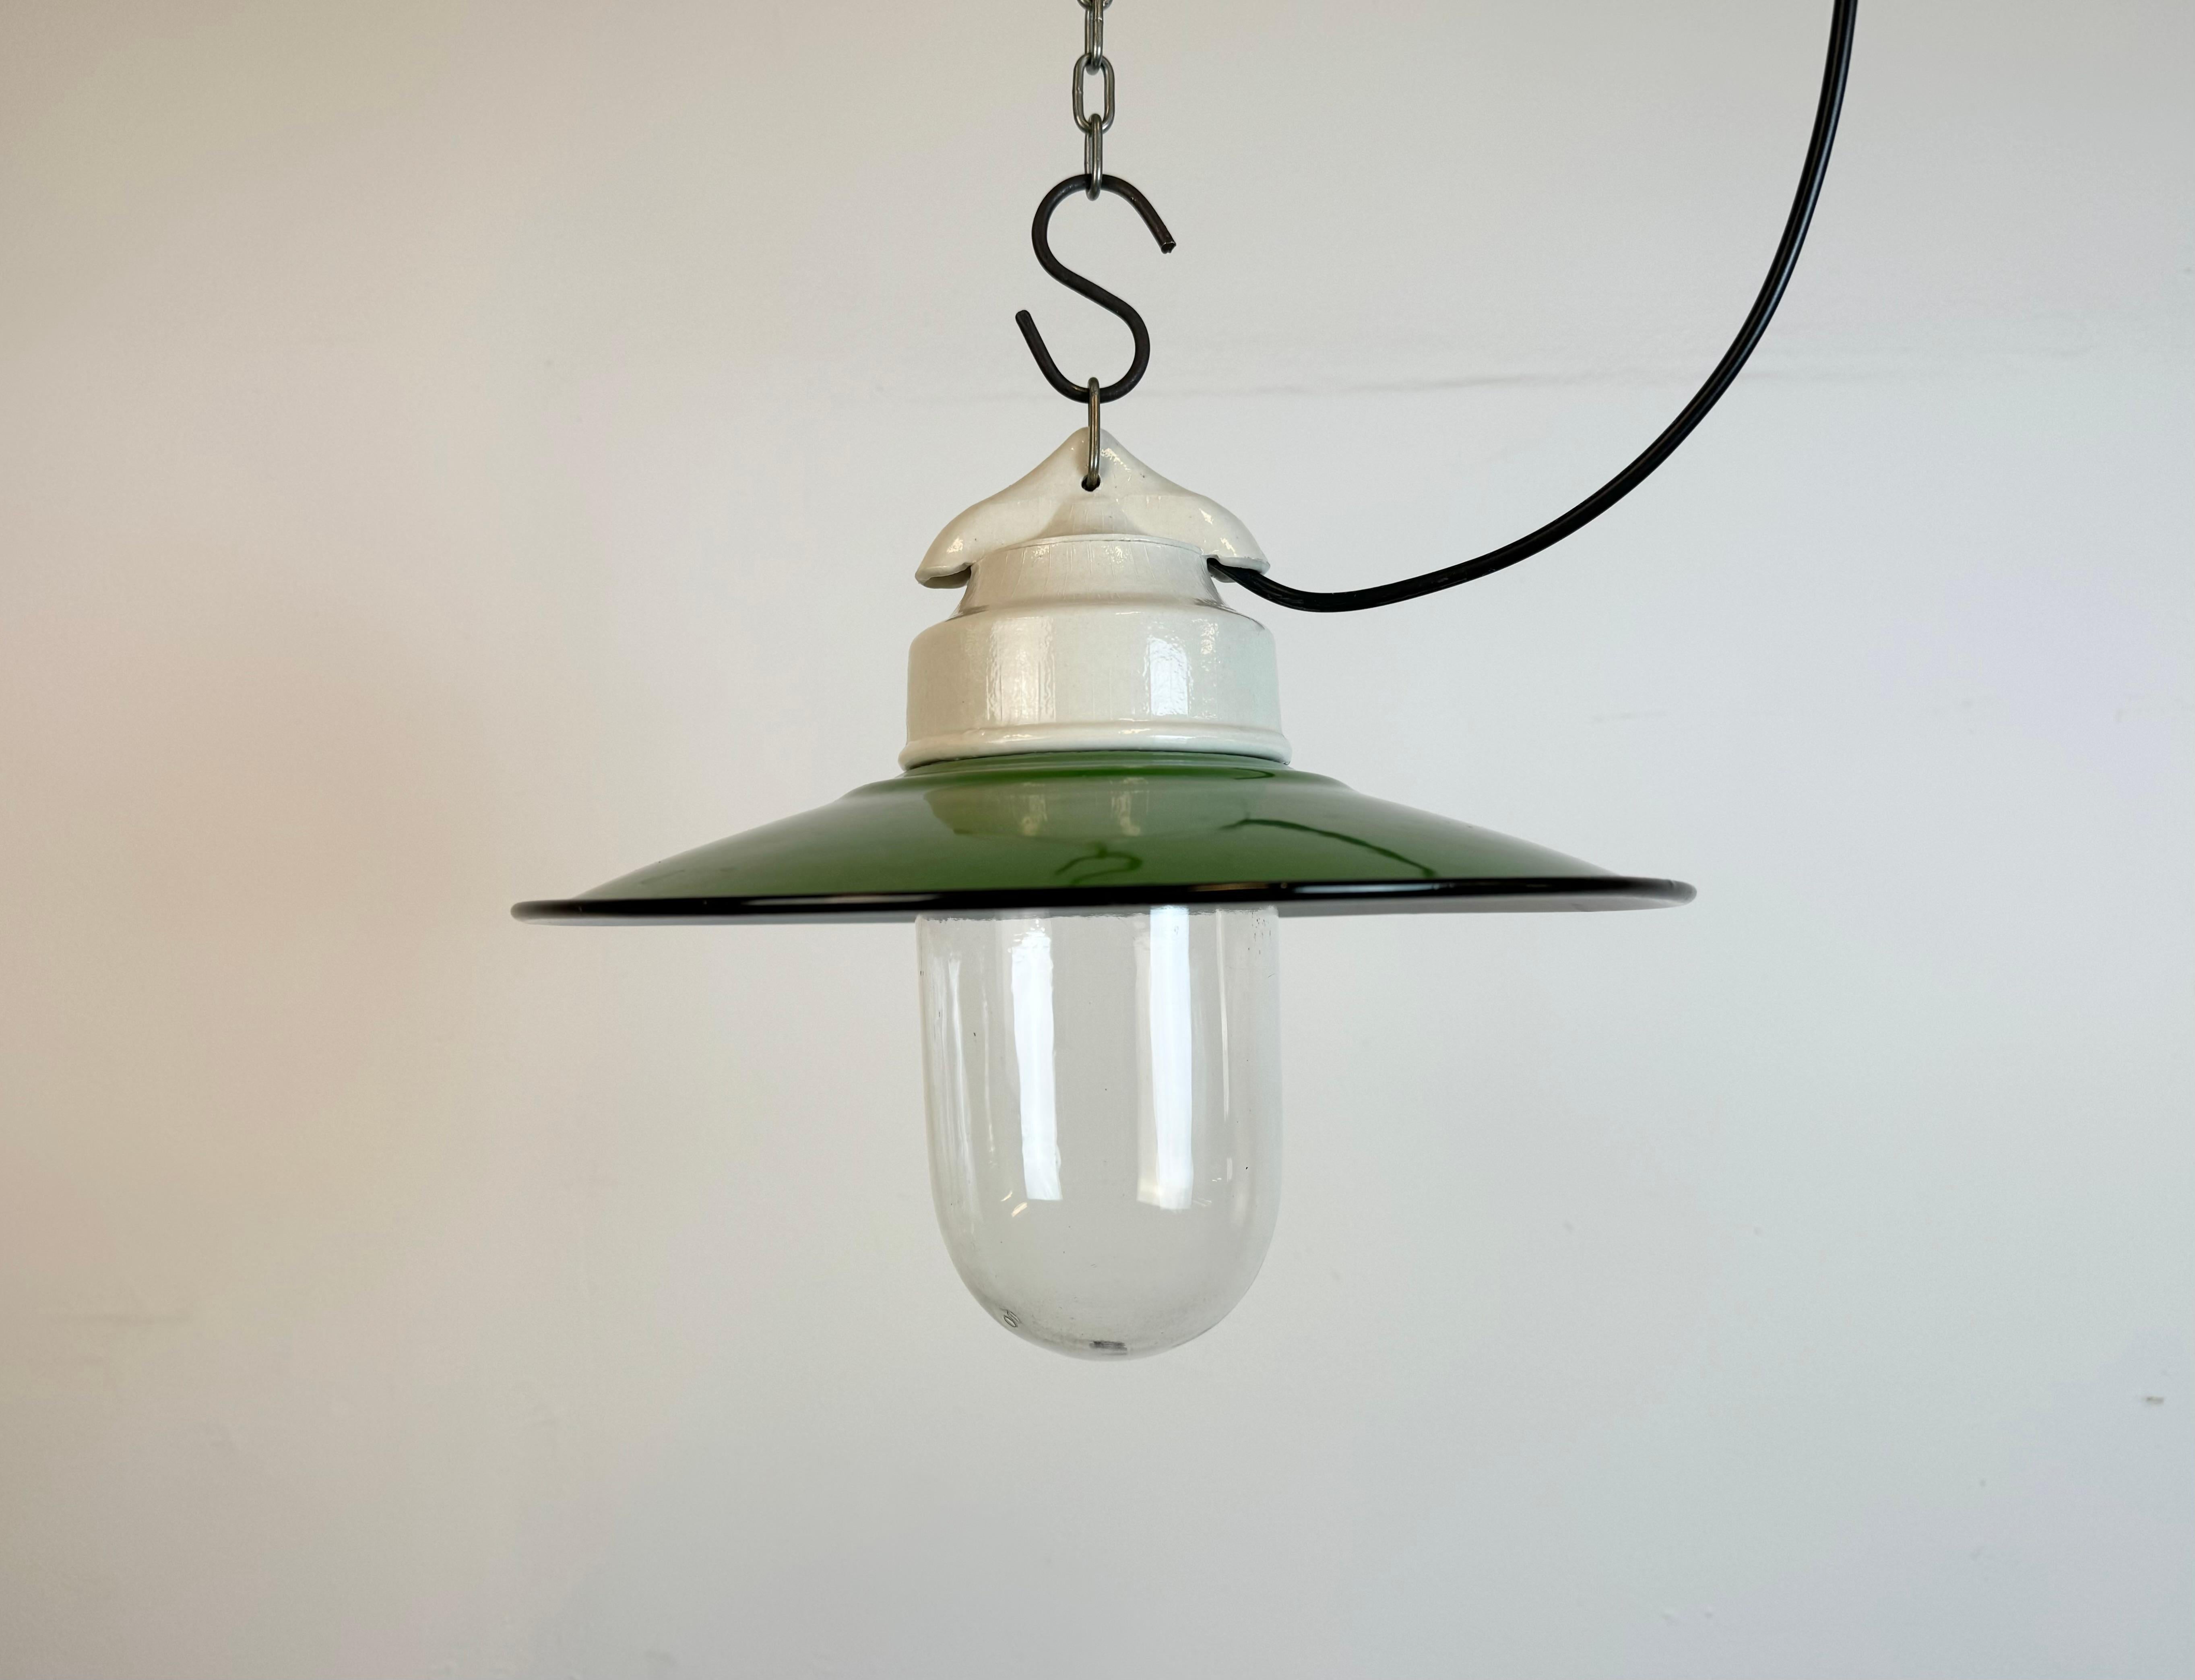 Vintage industrial light made in former Czechoslovakia  during the 1970s. It features a green enamel shade with white enamel interior ,a porcelain top and a clear glass cover. The socket requires standard E27/ E26 light bulbs. New wire. The weight